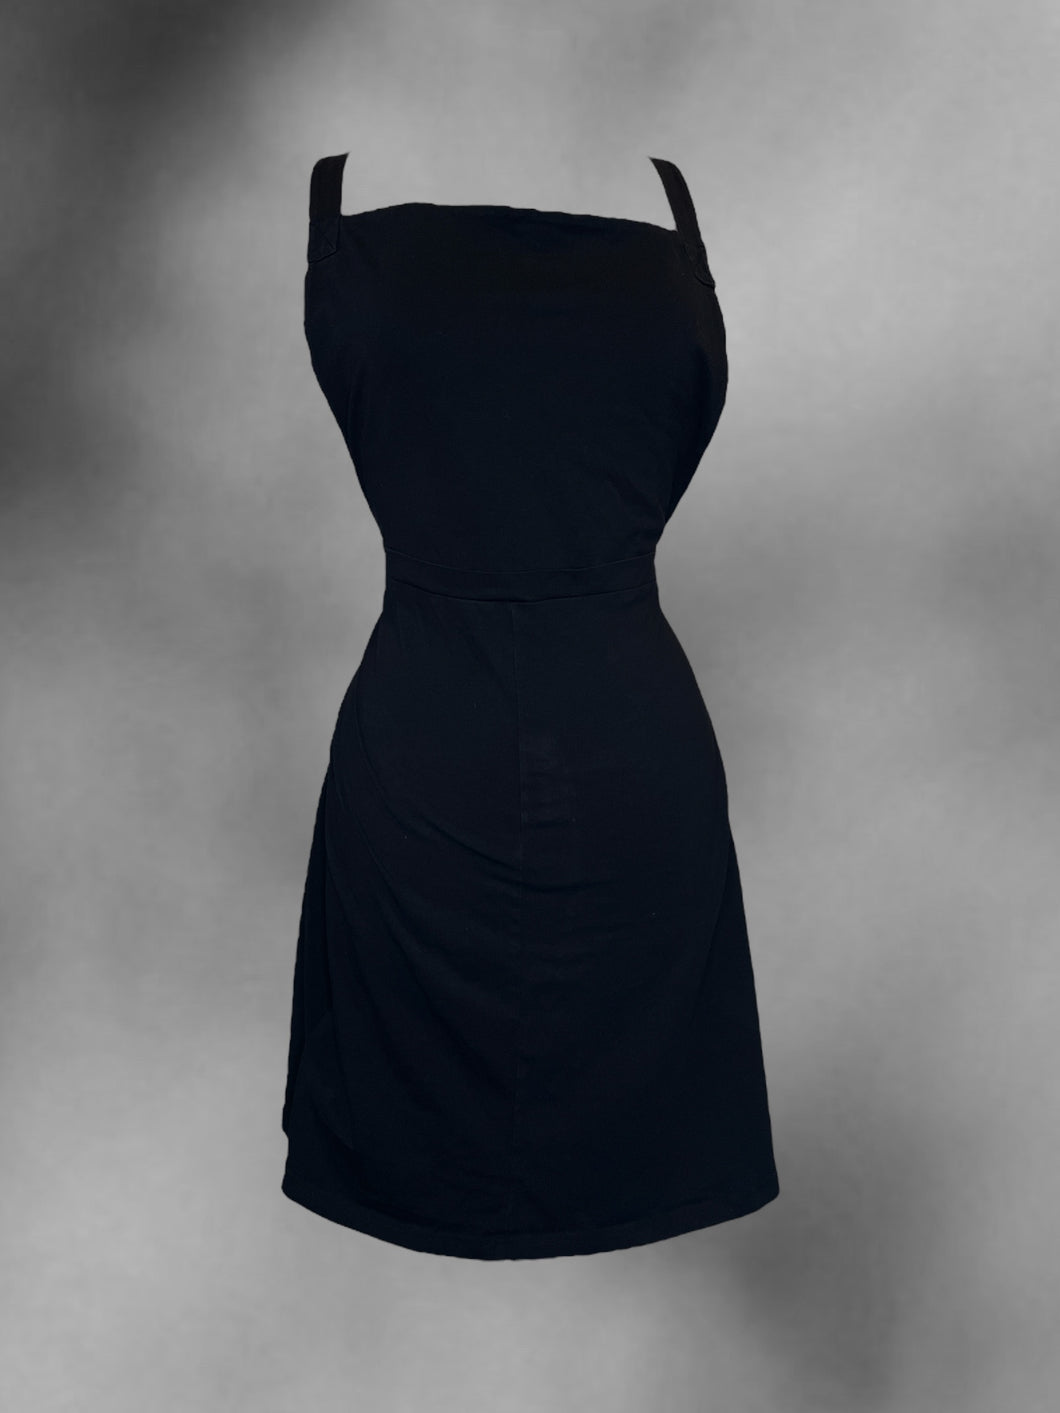 2X Black cotton overall dress w/ flare skirt, & crossing straps